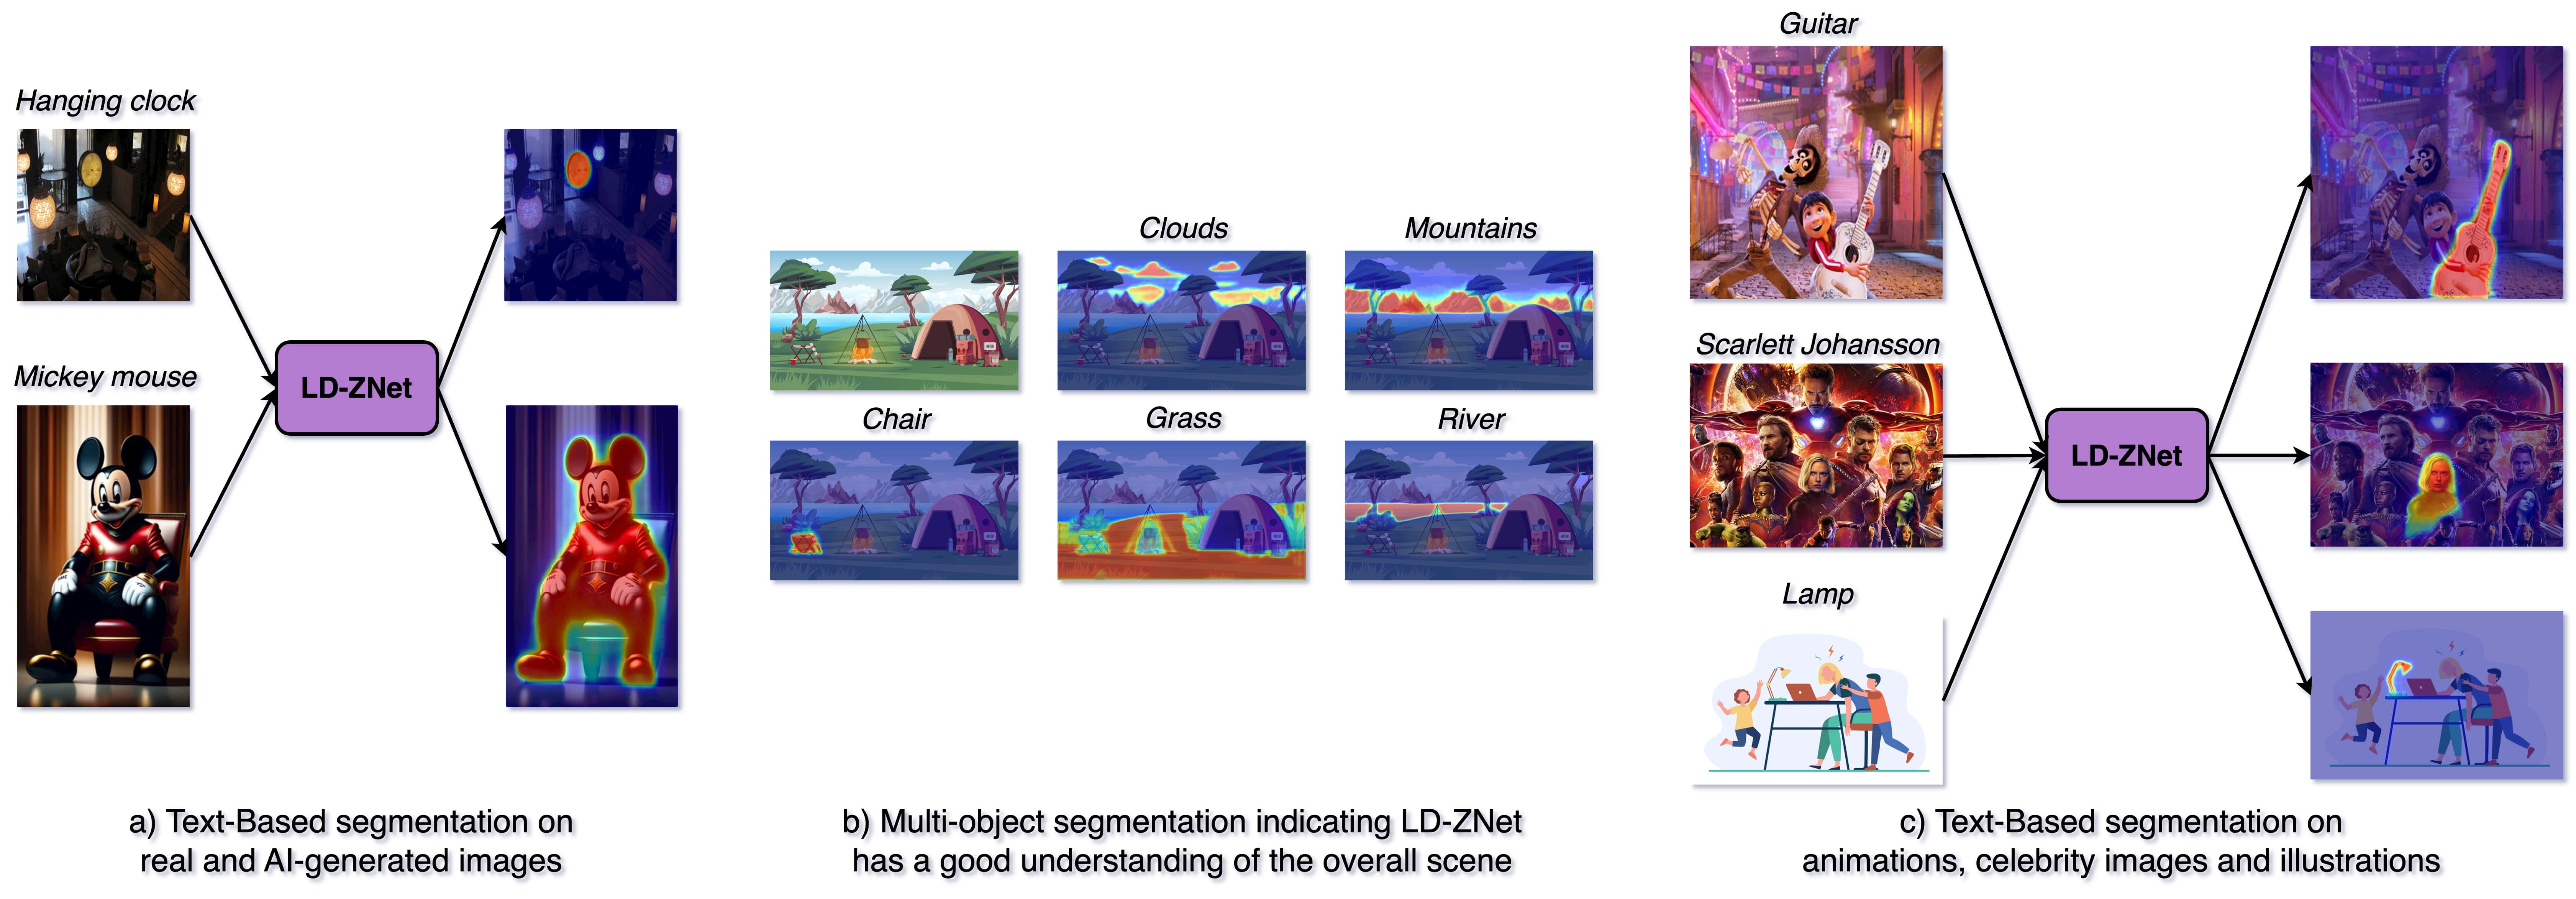 LD-ZNet segments various objects from the internet on real and AI-generated images